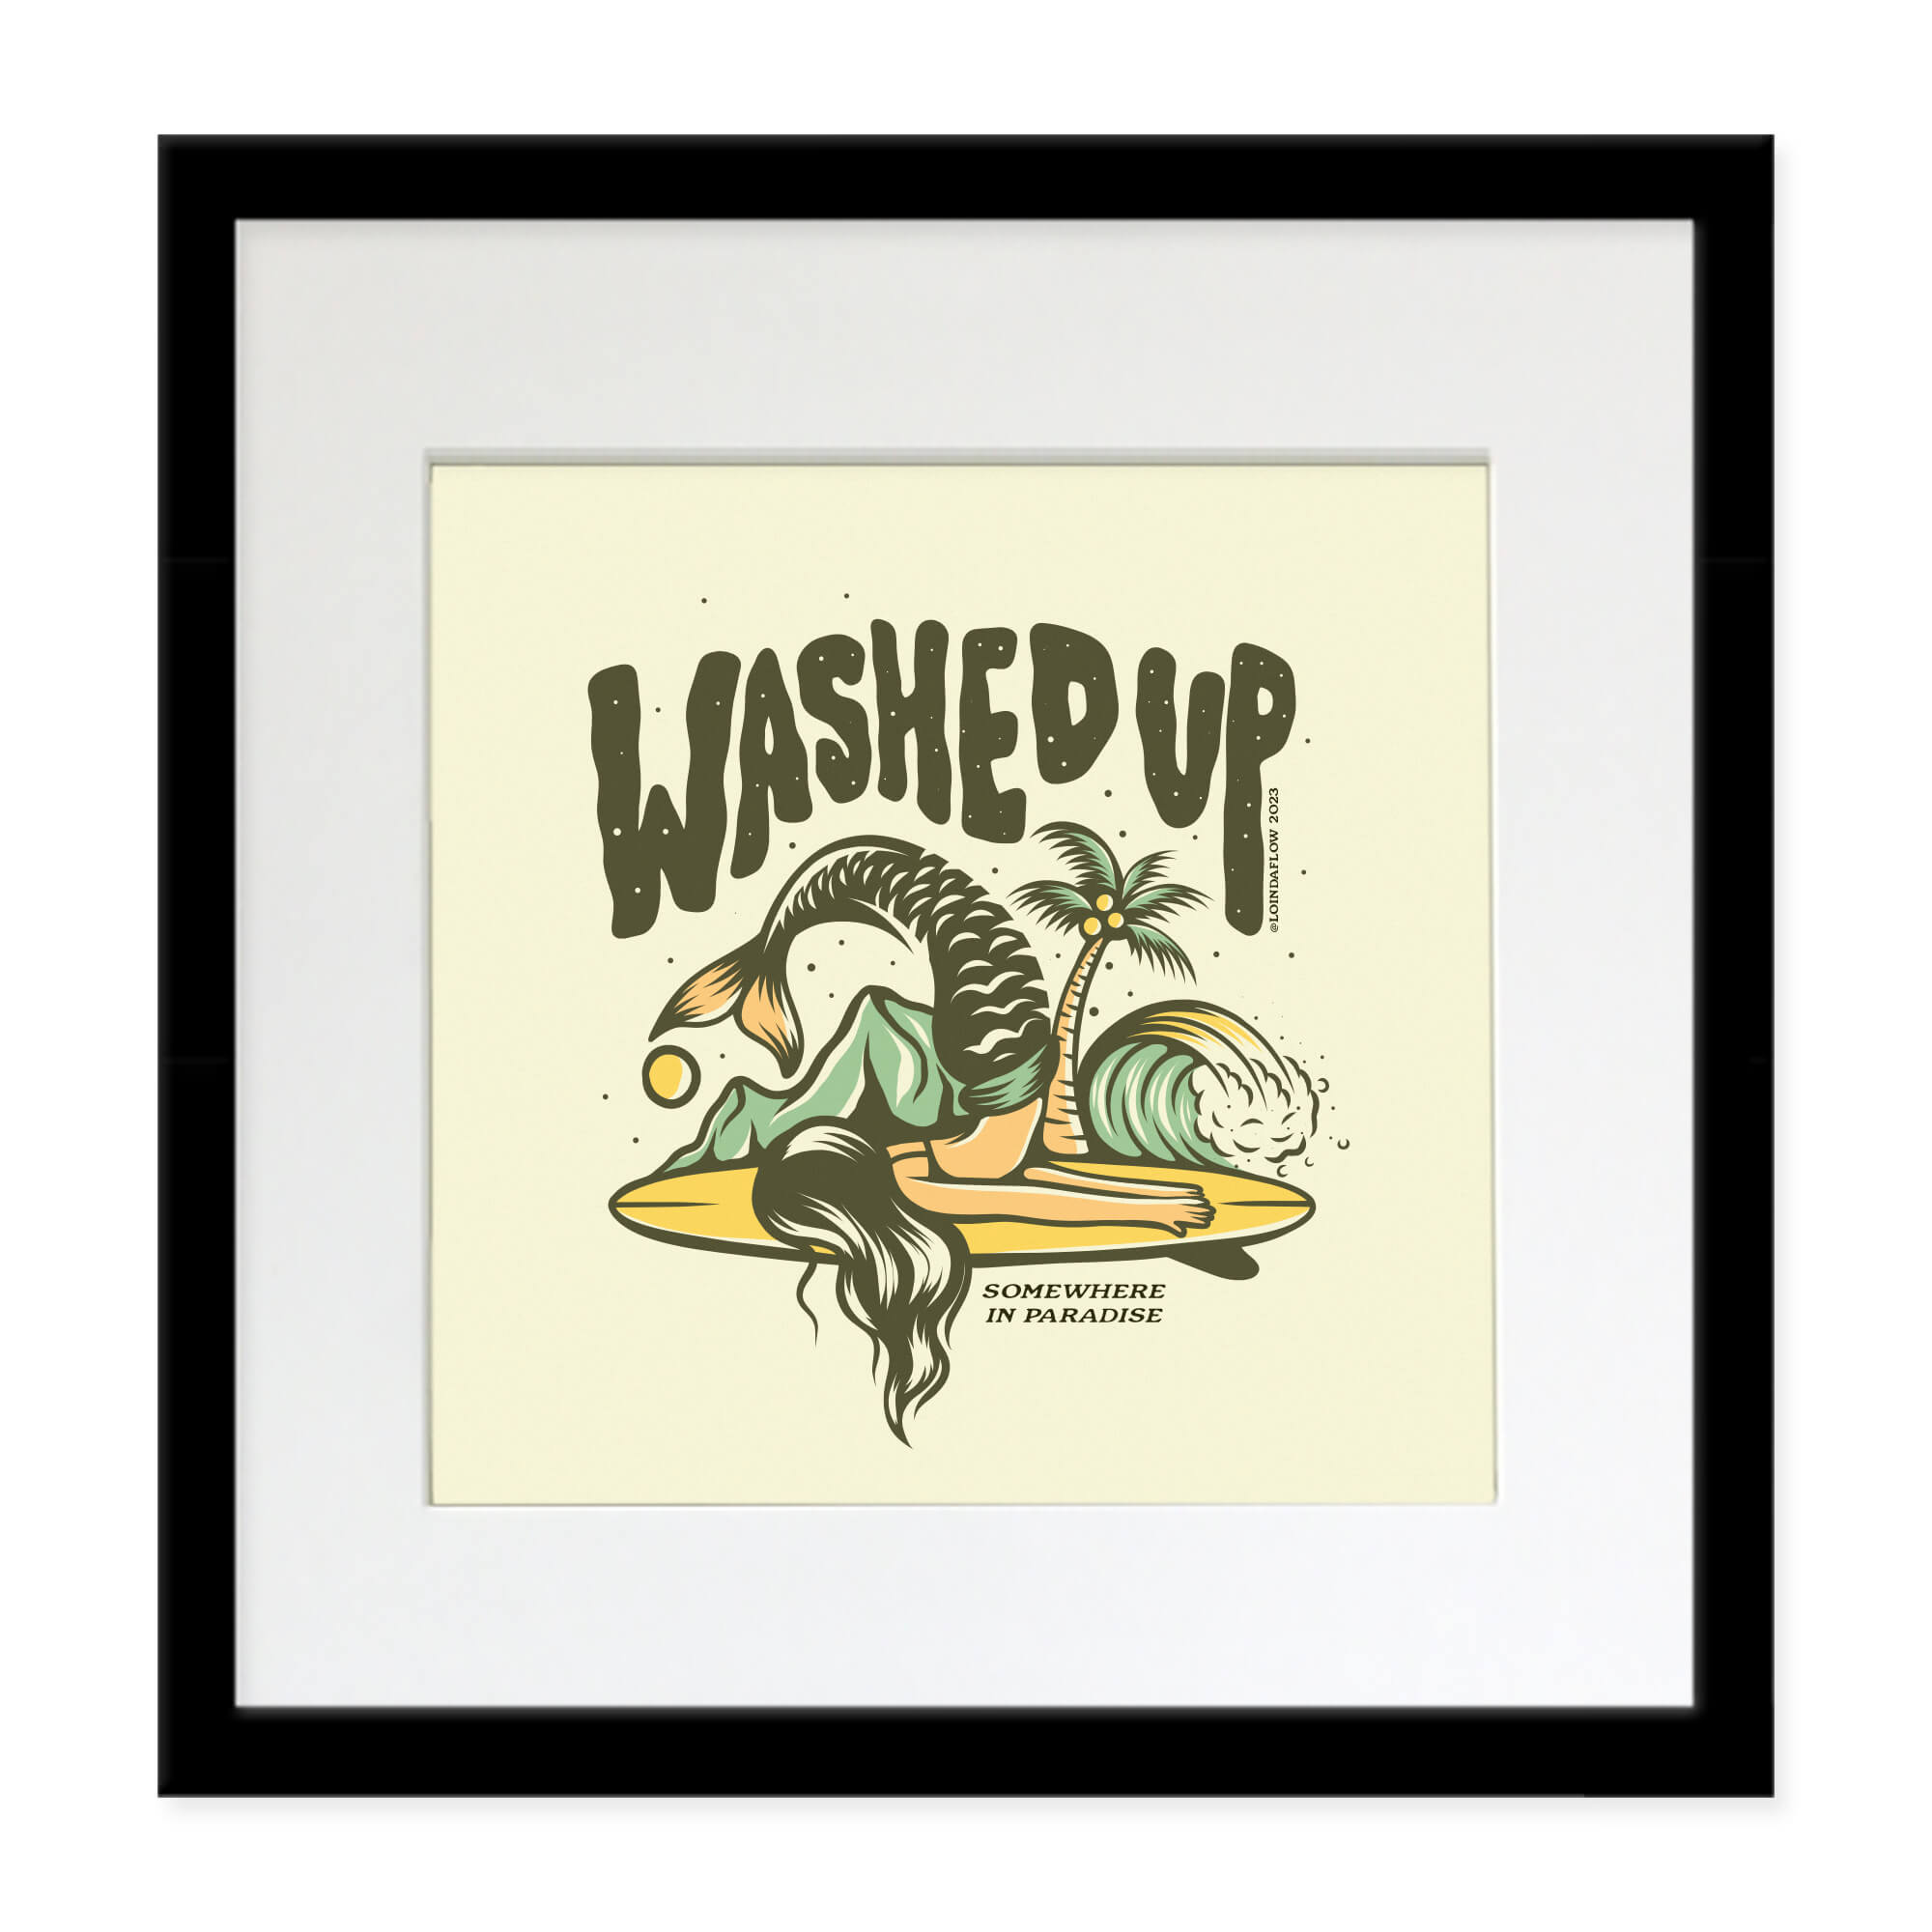 Matted print with black frame featuring a mermaid washed up on an surfboard-like island by Hawaii artist Laihha Organna